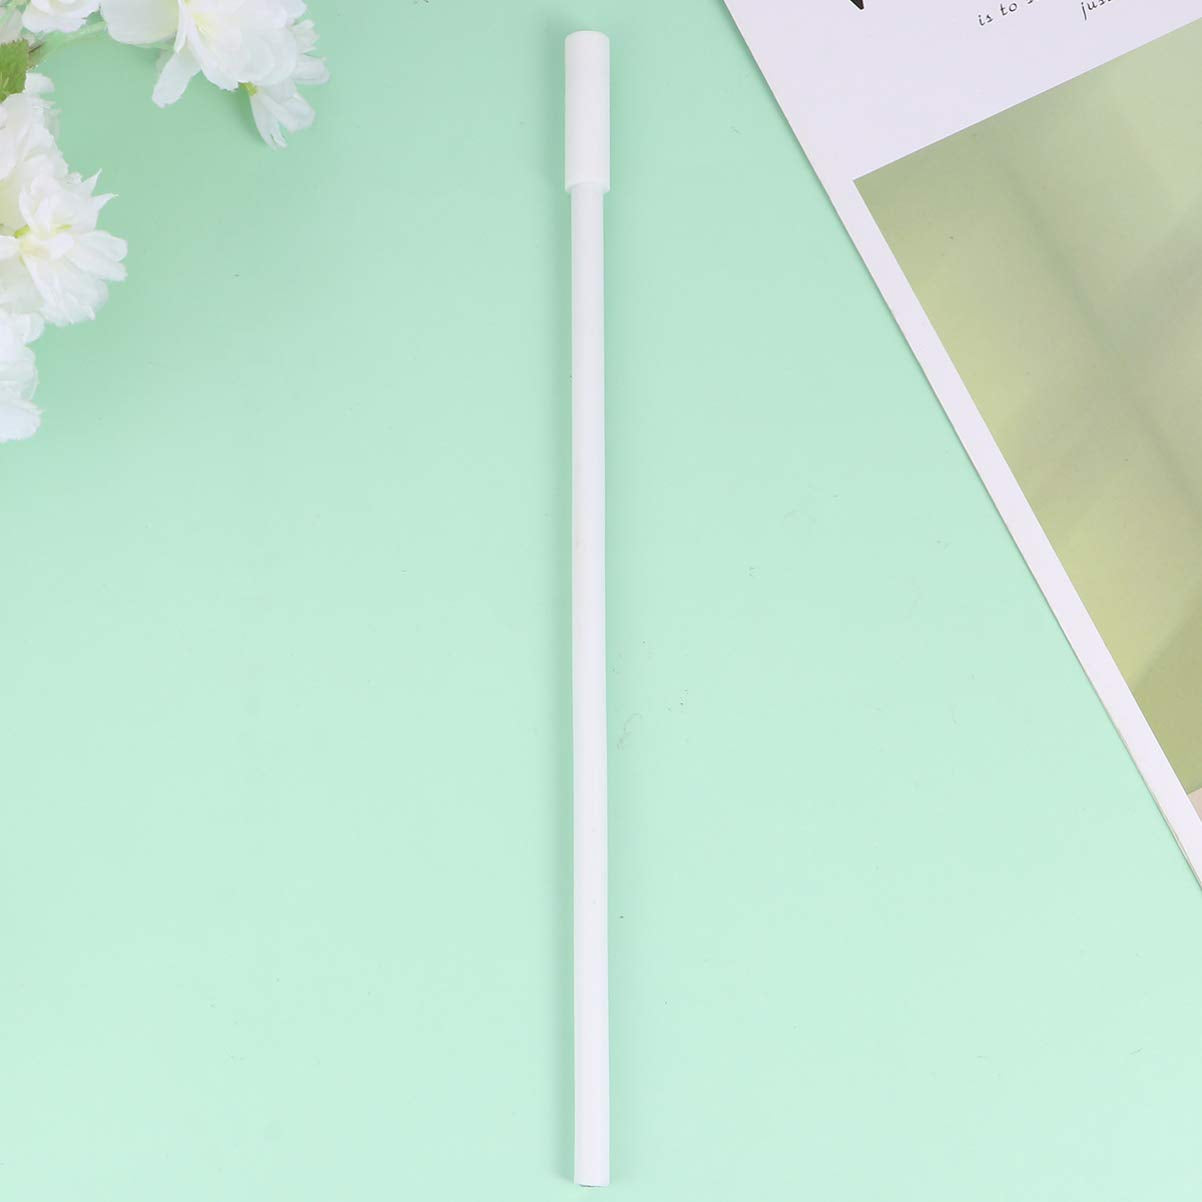 1 Pc Stirring Paddle Lab Equipment Laboratory Stirring Rods Magnetic Mixer Rod for Stirring Coffee Stirrers Magnetic Stirring Glass Stirring Stick Hot Plate Stirrer Glases White F4